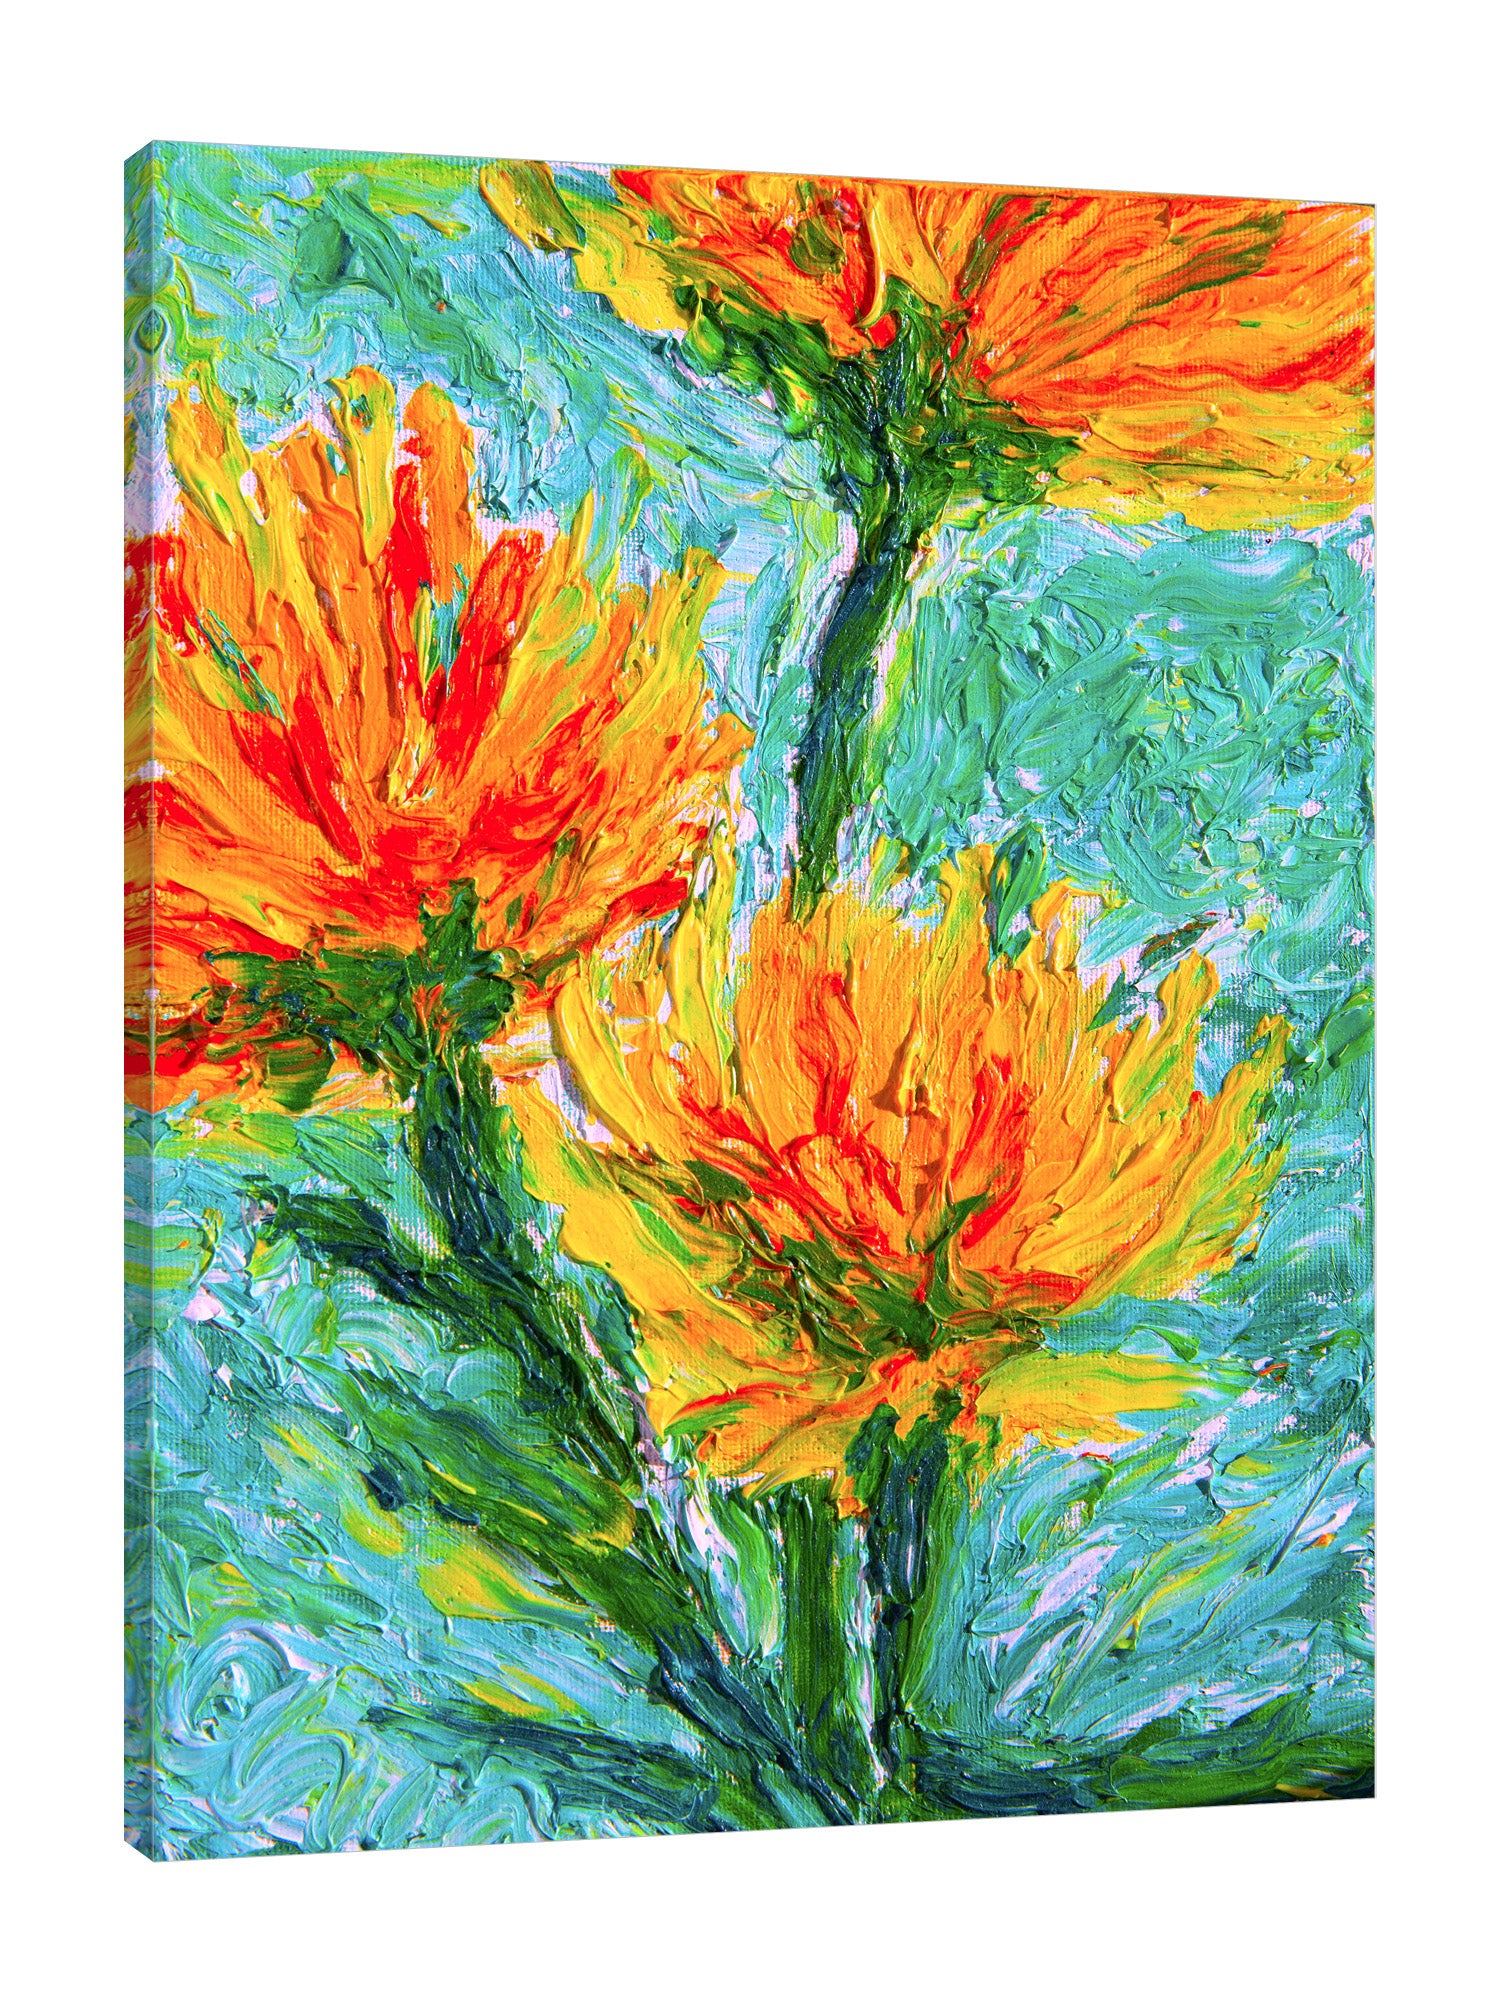 Chiara-Magni,Modern & Contemporary,Floral & Botanical,Finger-paint,florals,flowers,floral,flower,botanical,yellow,orange,red,green,strokes,